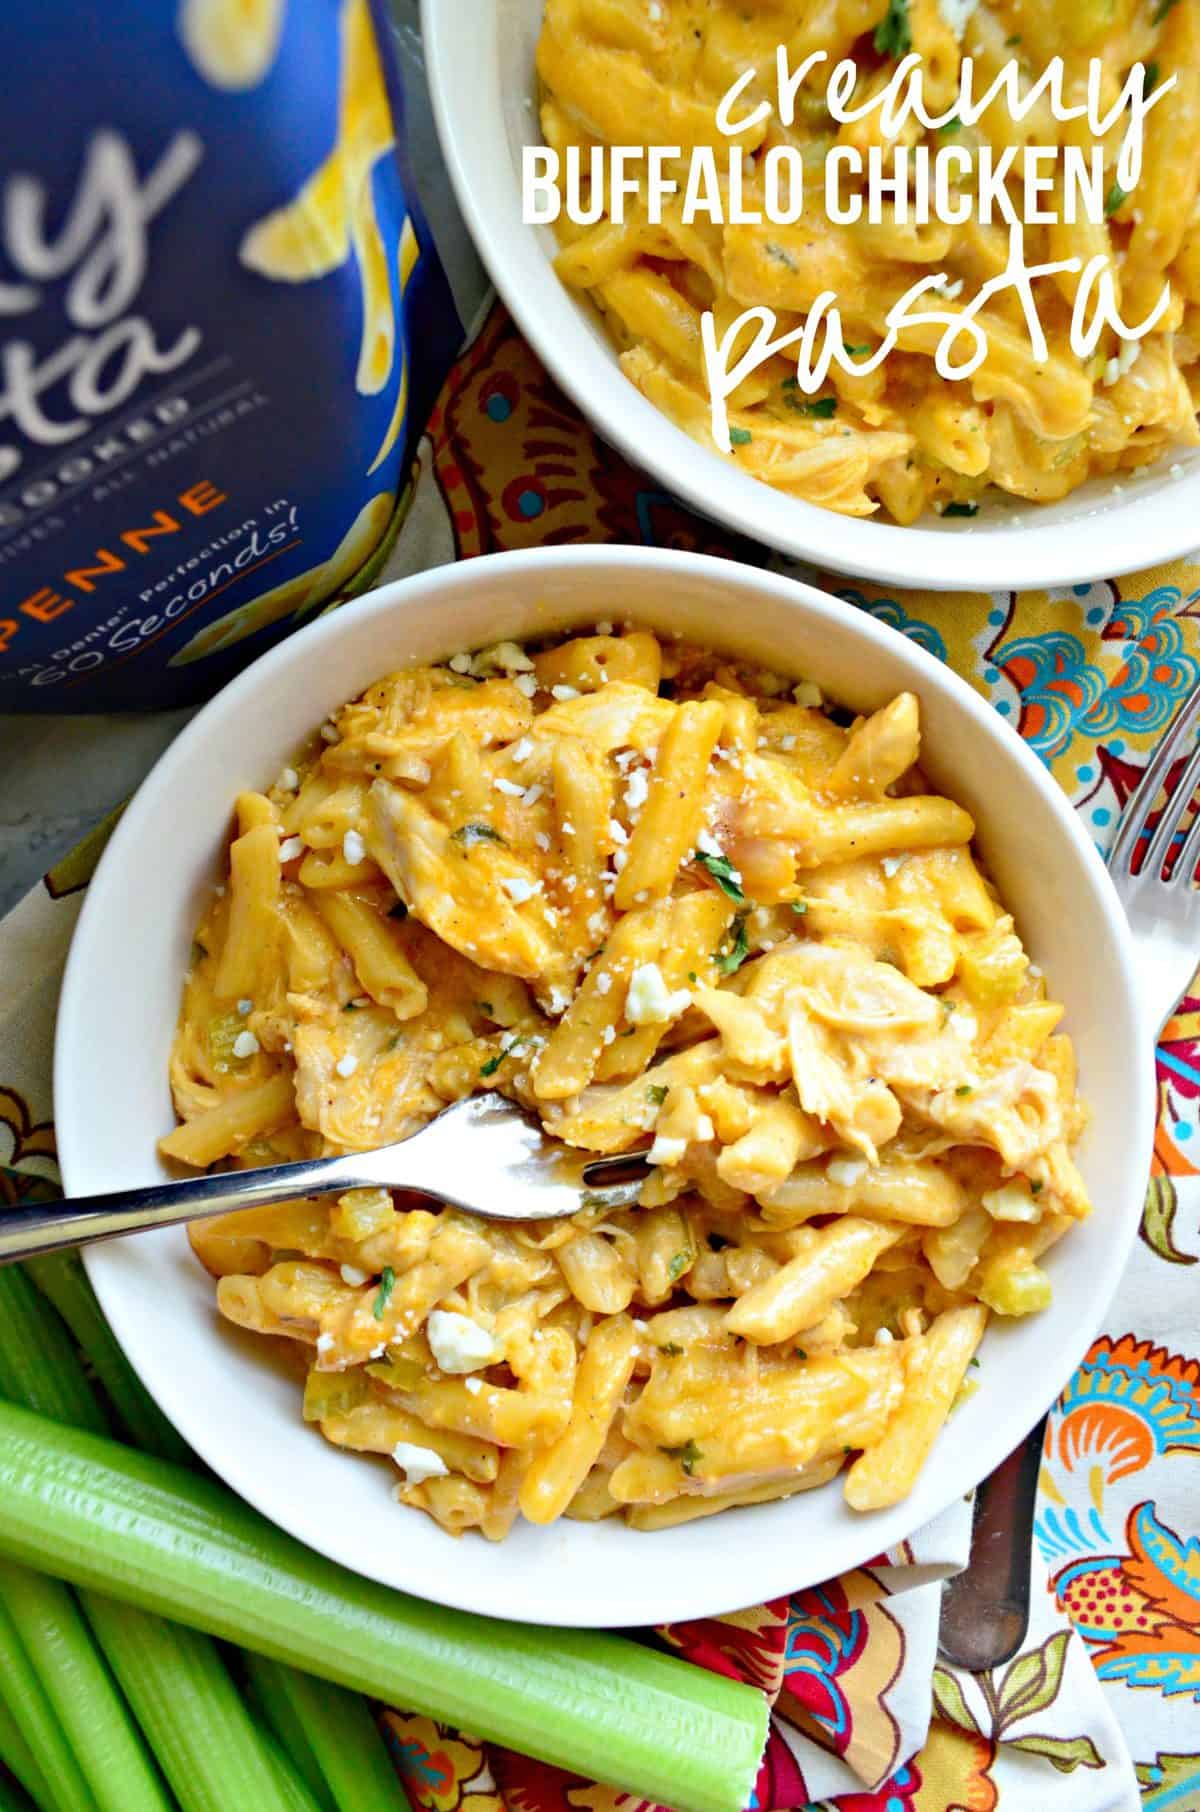 creamy light orange colored buffalo chicken penne pasta in white bowl with herbs, cheese, and title text.